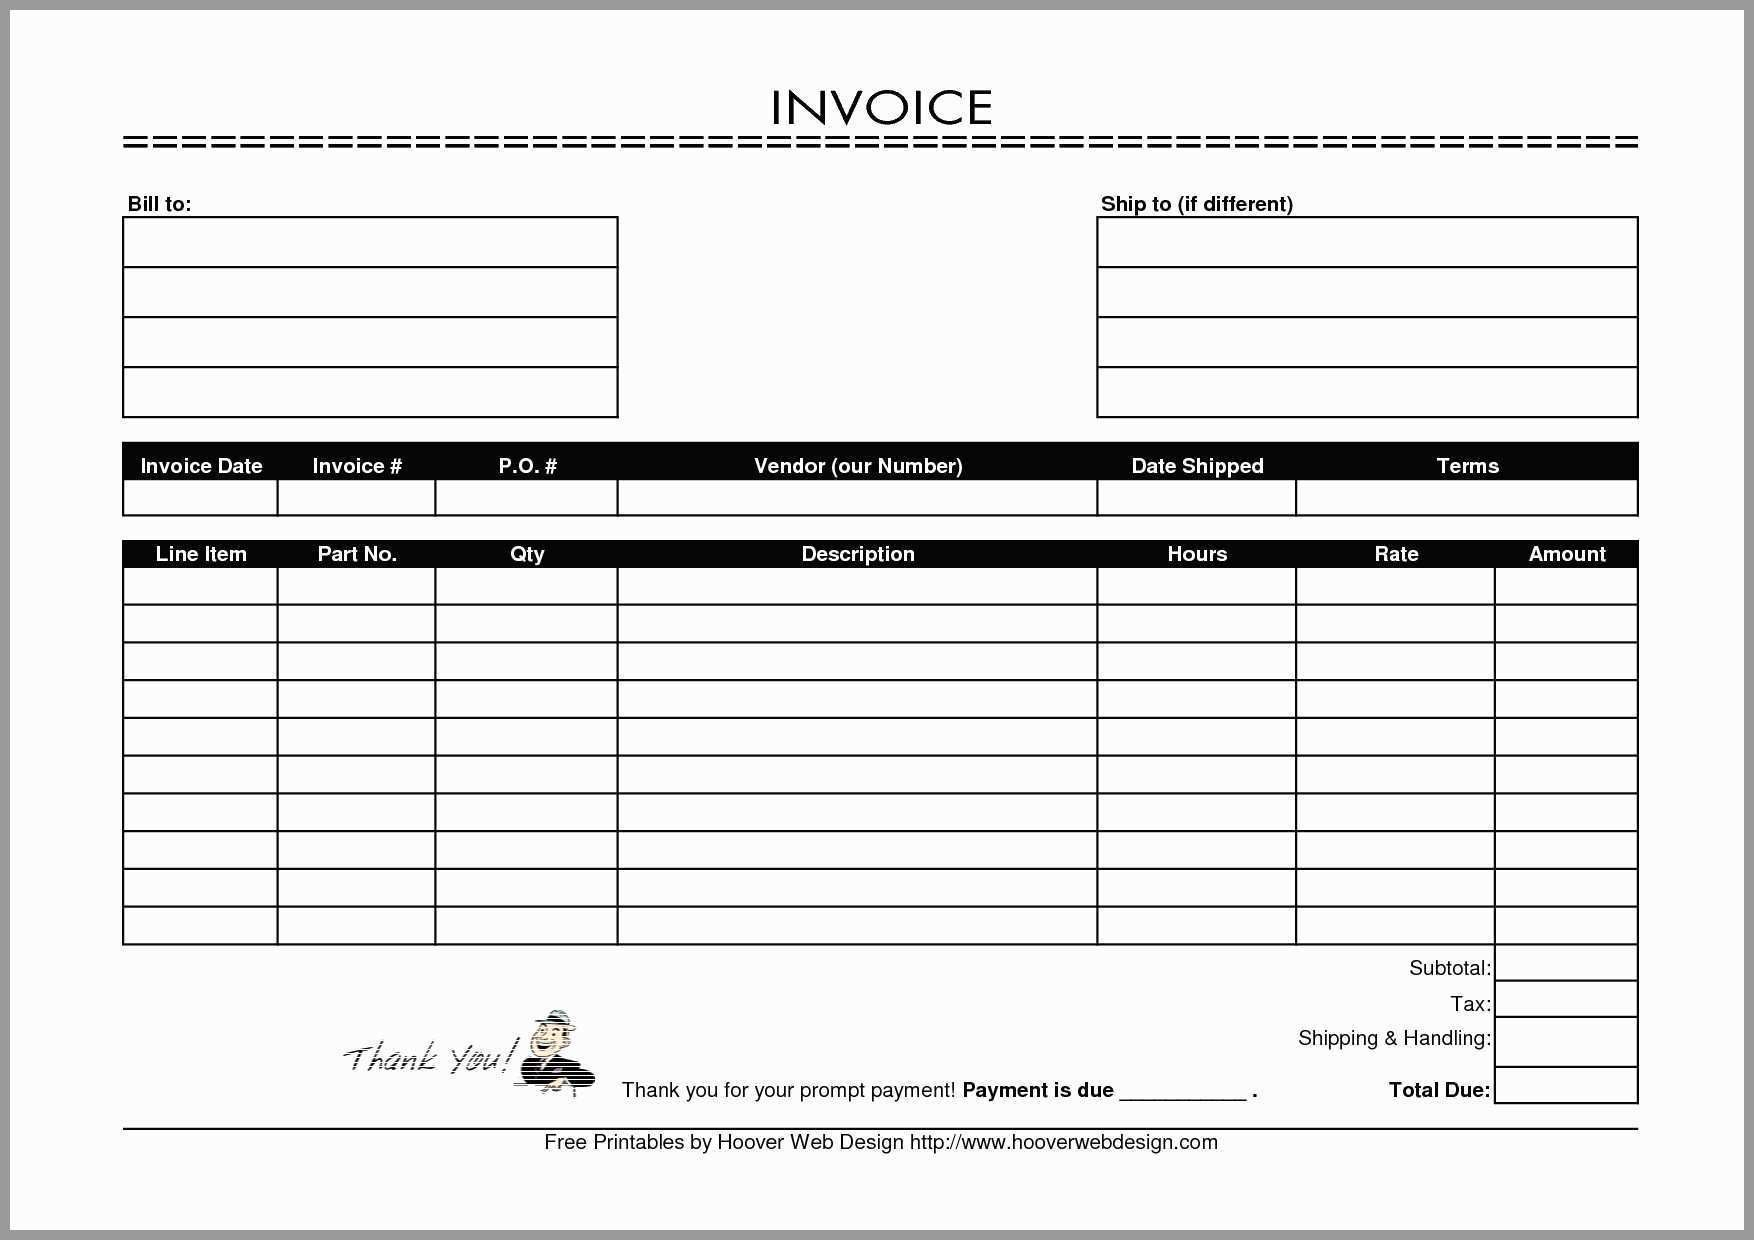 Free Printable Loyalty Card Template Prettier Printable Free Invoice - Free Printable Loyalty Card Template